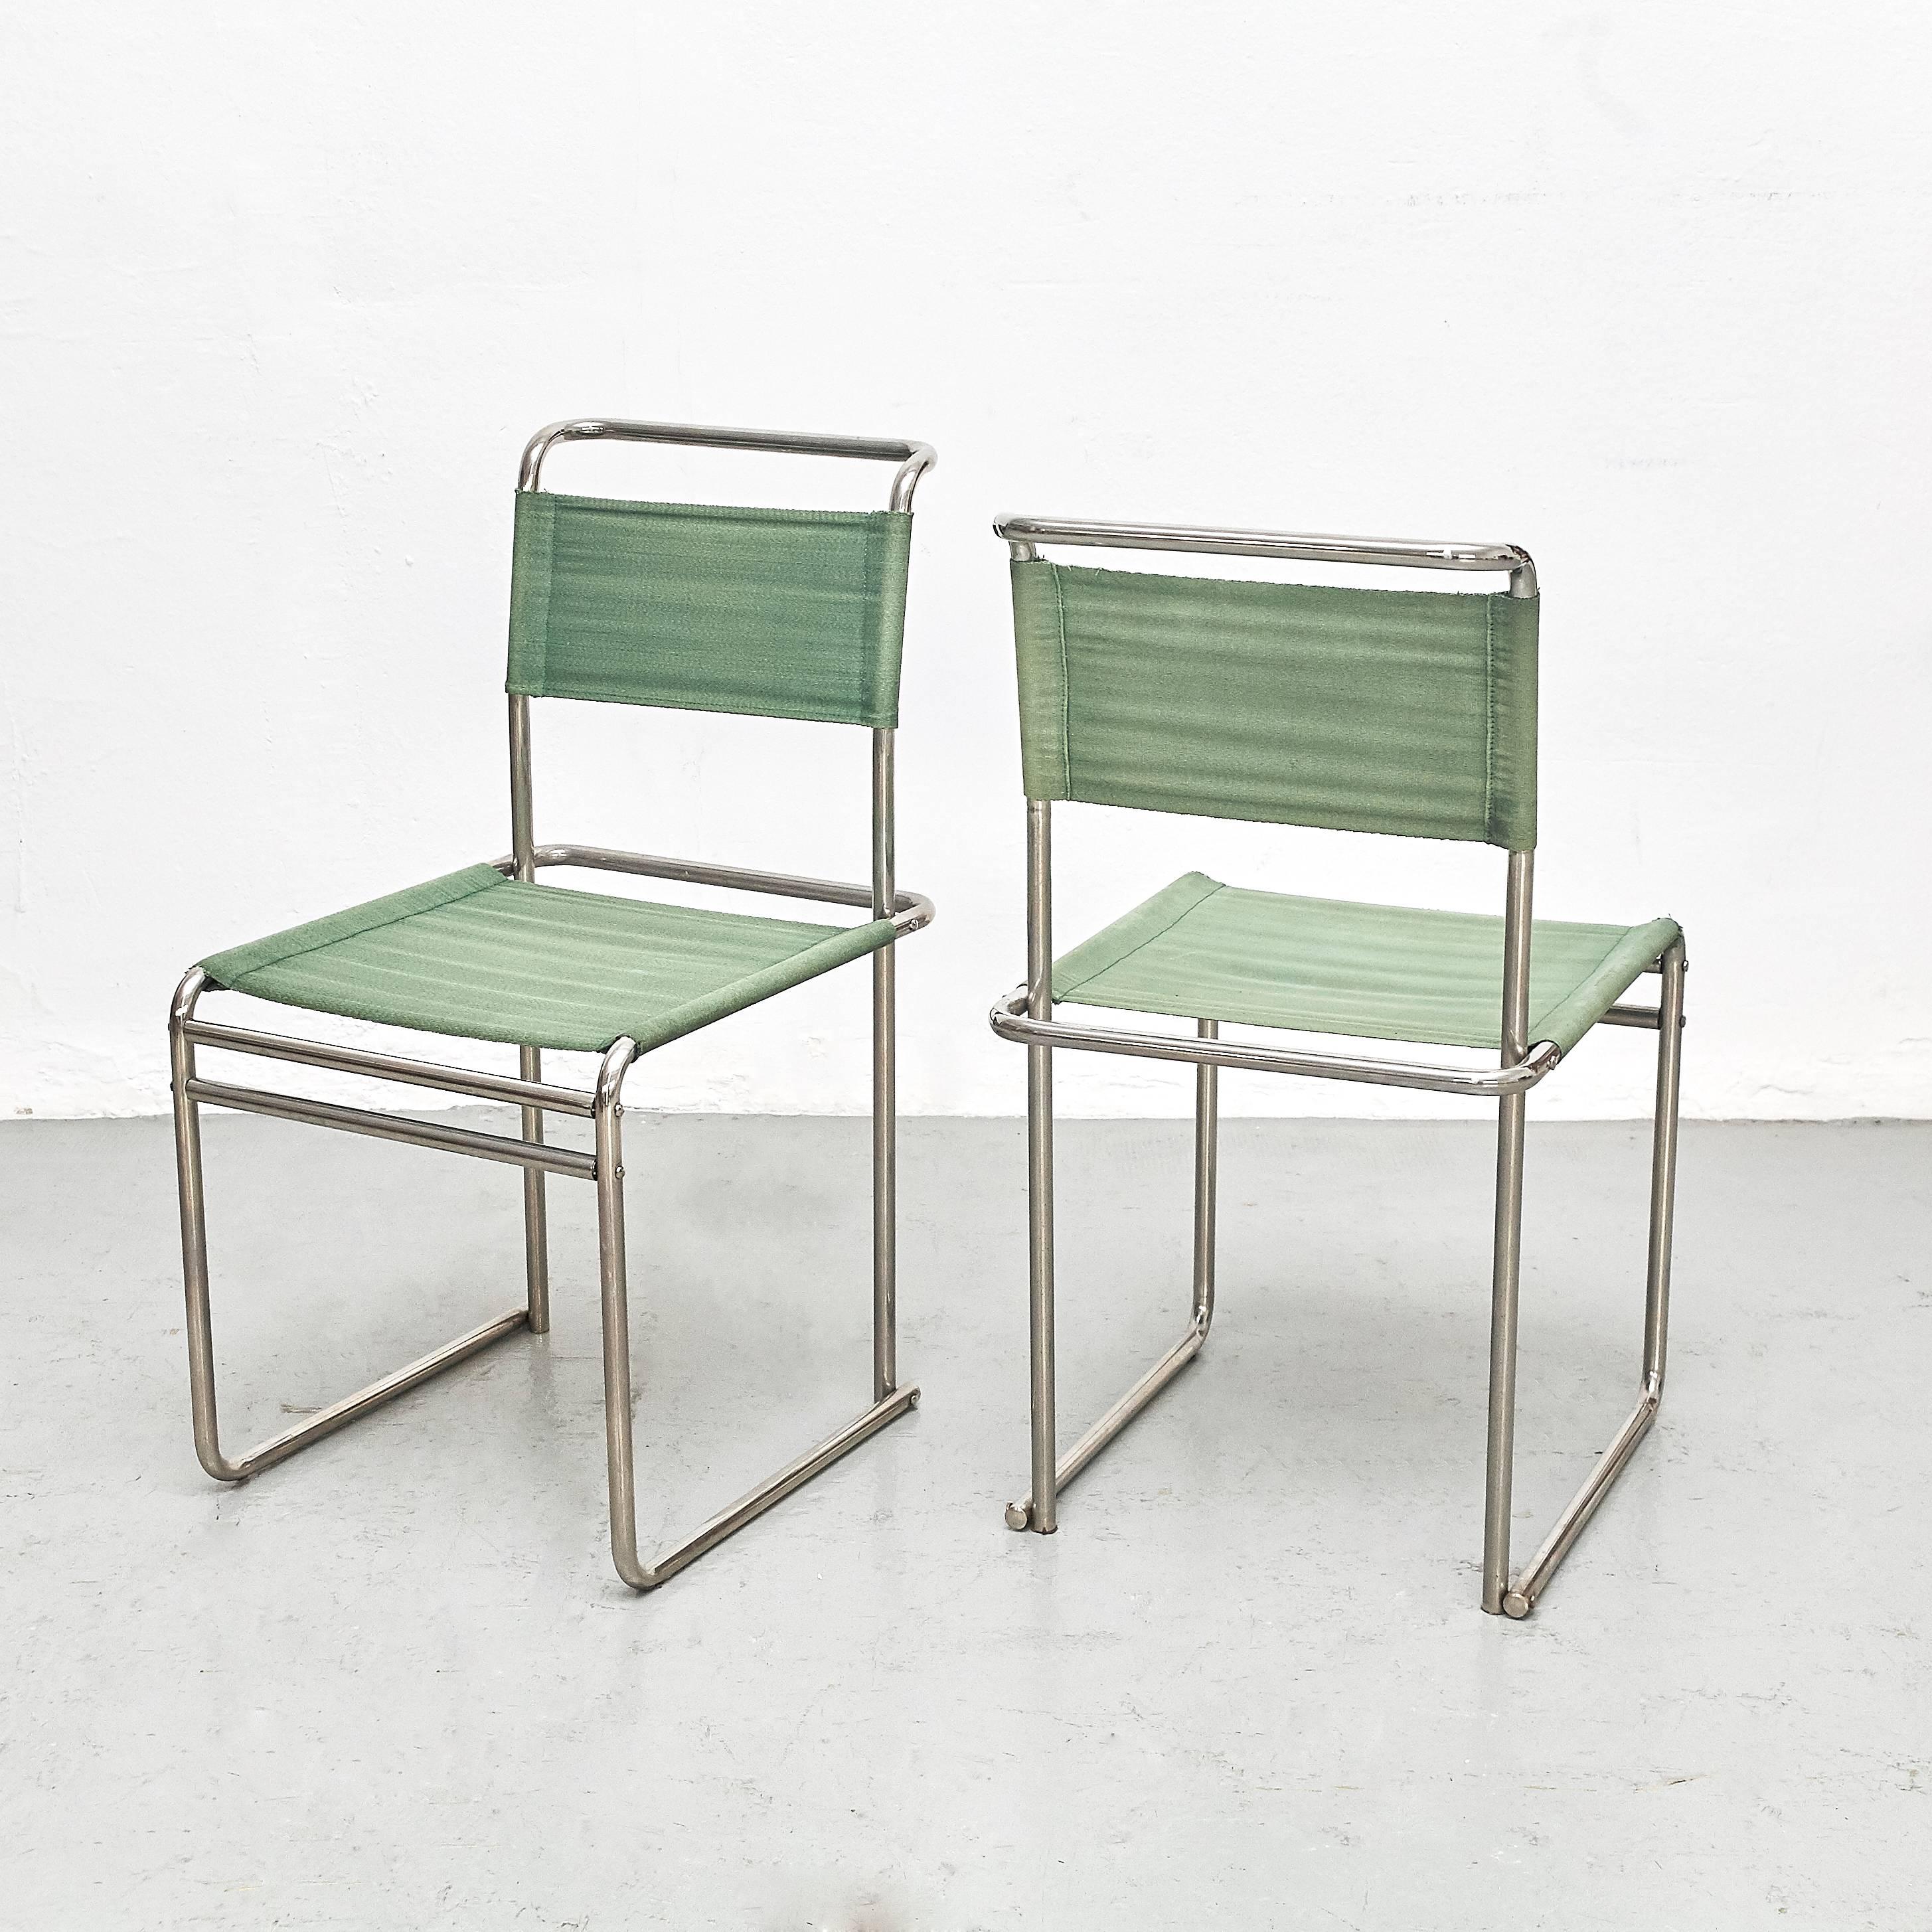 B5 chairs designed by Marcel Breuer, circa 1926.
Manufactured by Tecta around 1970.

Tubular steel, fabric.

In good original condition, with minor wear consistent with age and use, preserving a beautiful patina. 

Marcel Lajos Breuer (1902-1981),